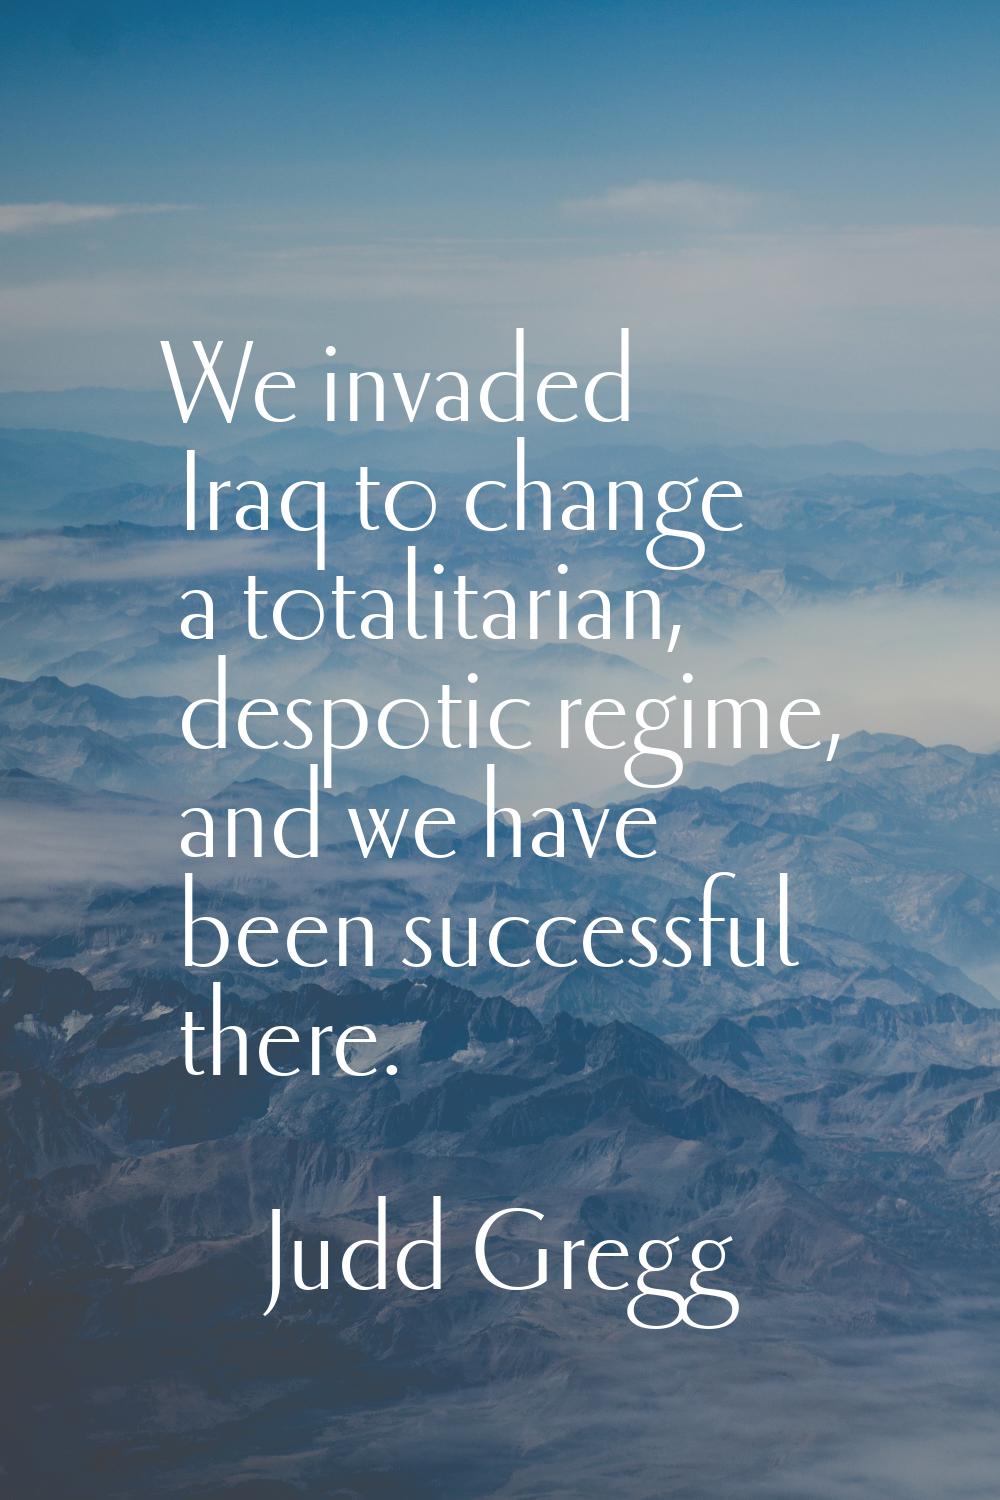 We invaded Iraq to change a totalitarian, despotic regime, and we have been successful there.